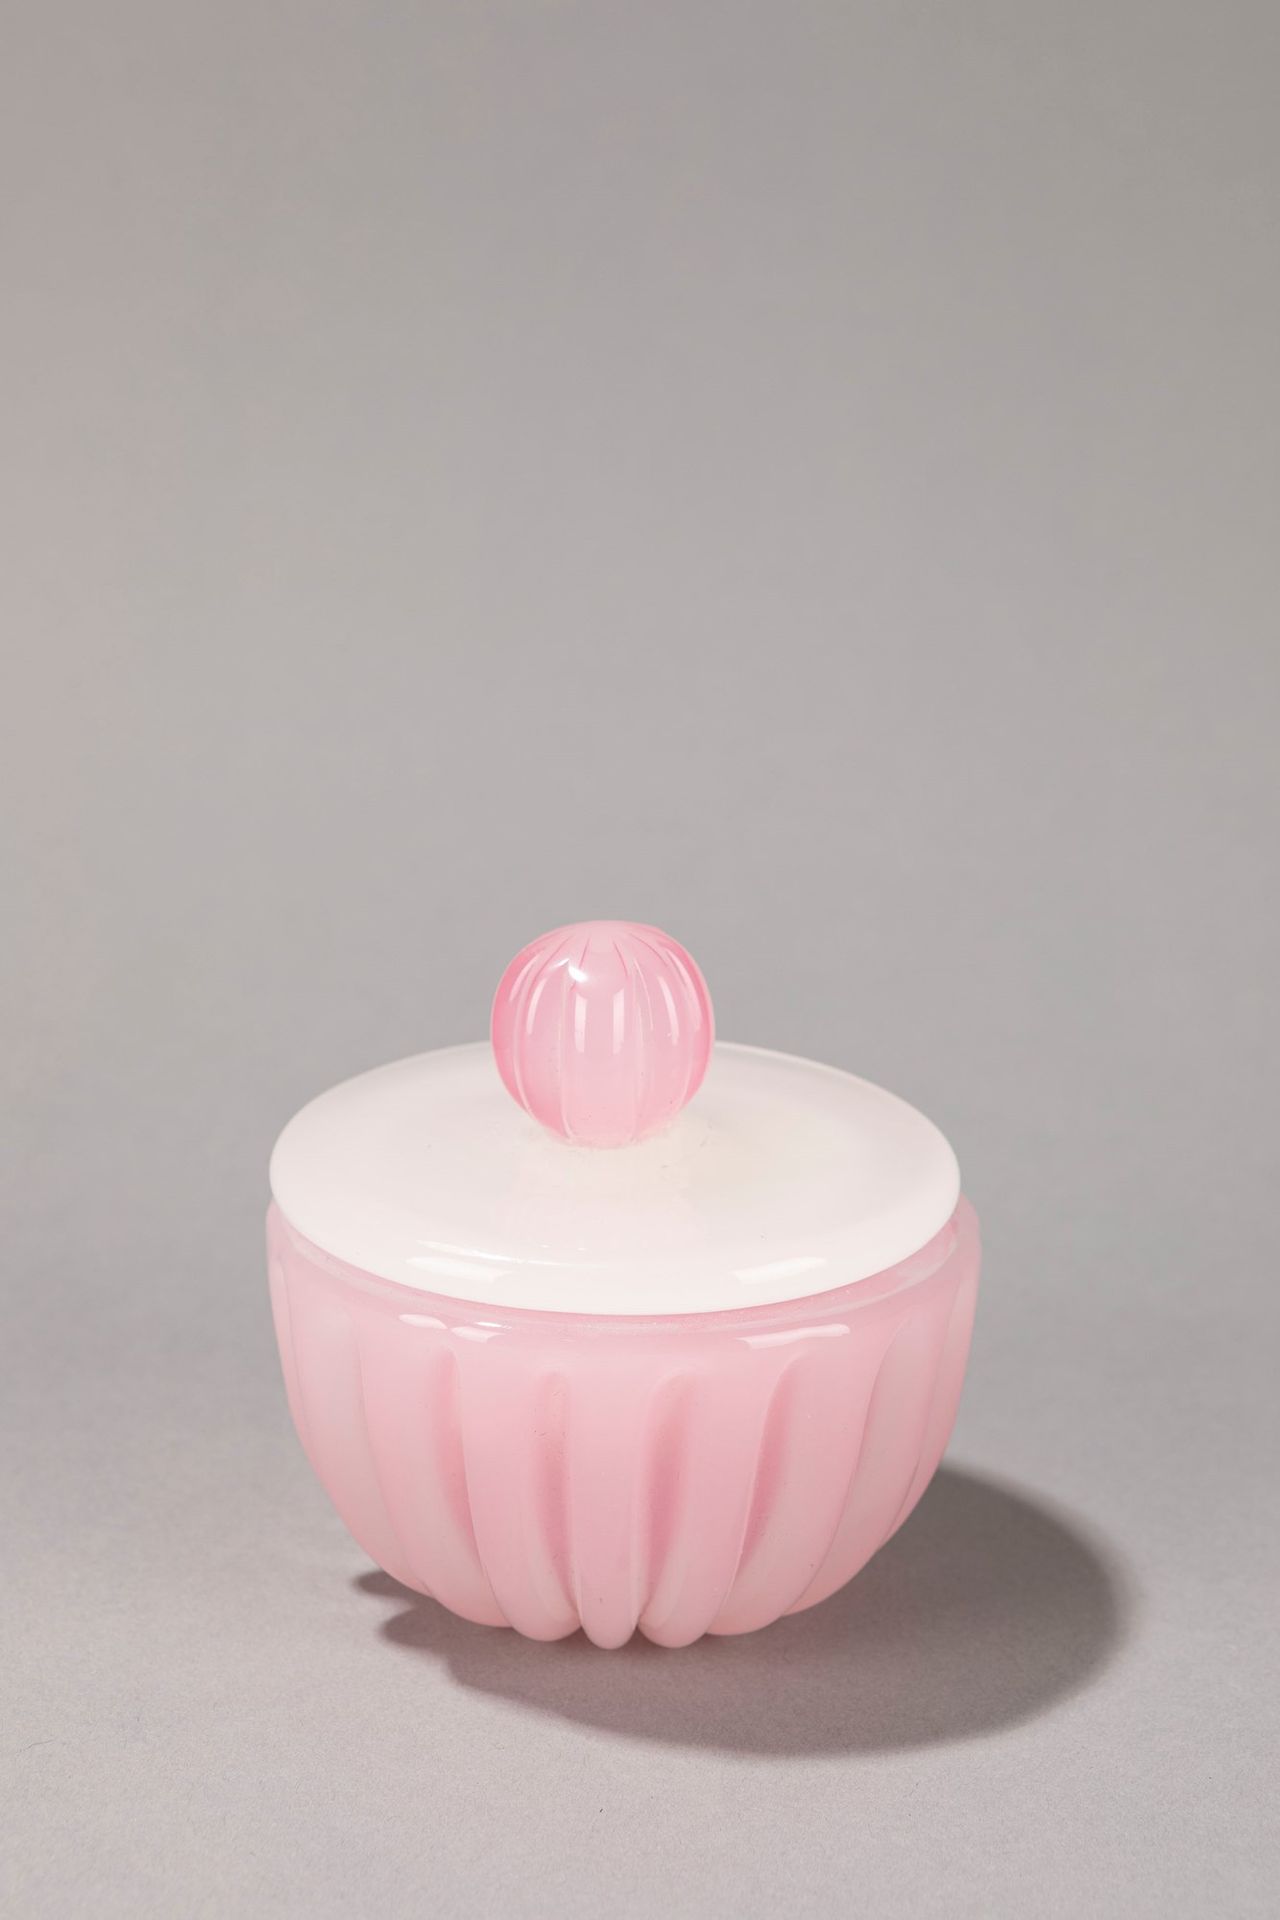 Archimede Seguso Box, 1950 ca. 

H 10 x 11 cm
with cup.

Pink alabaster